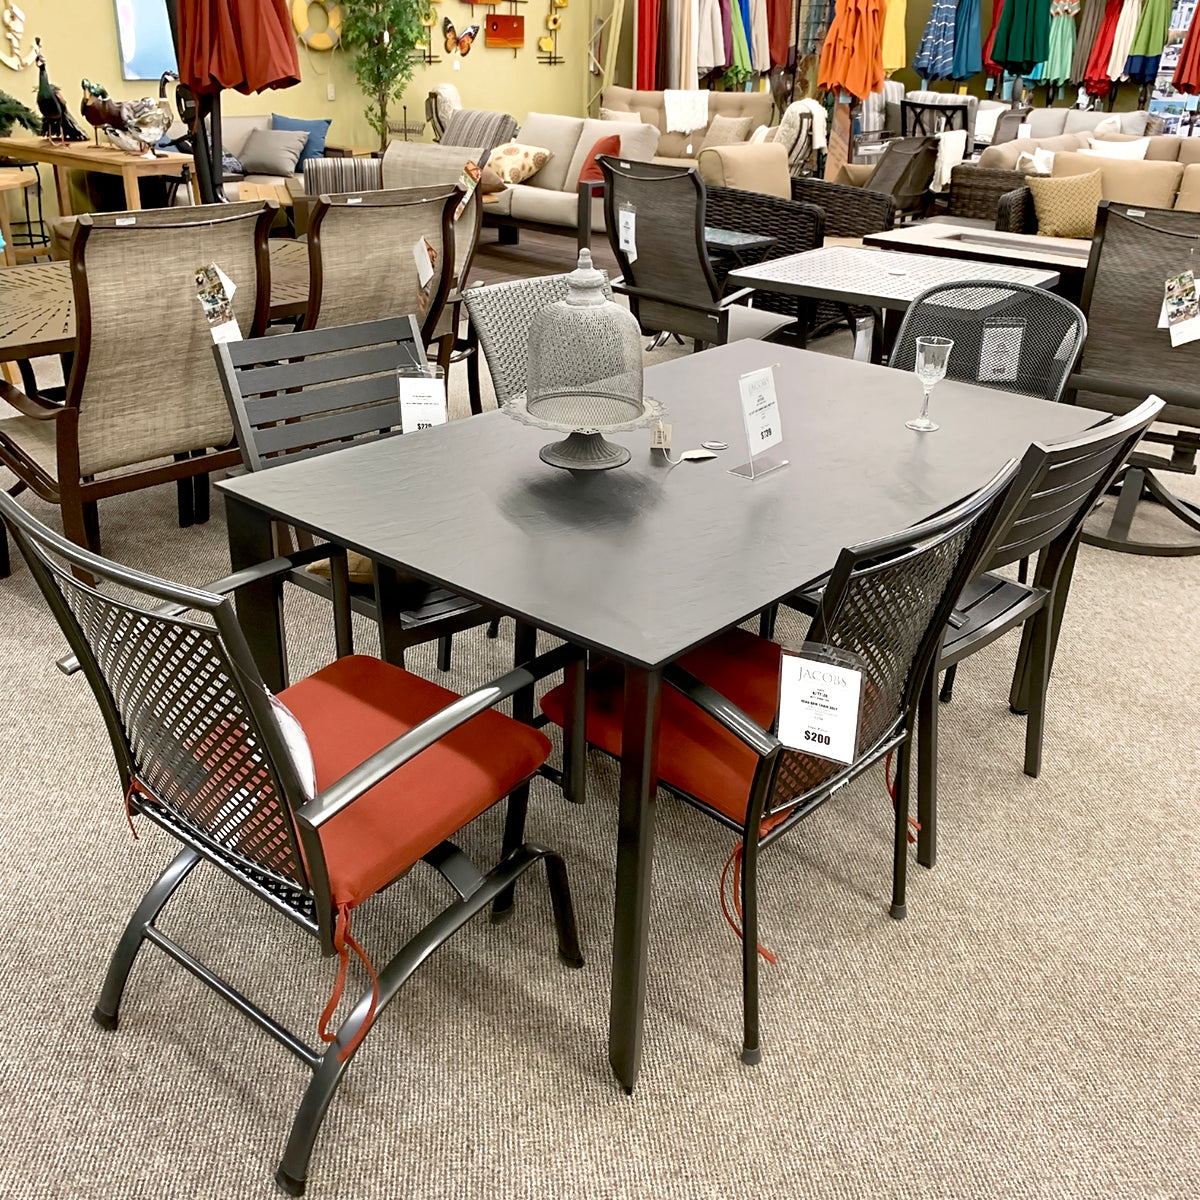 The Kettler Loft Patio Dining Table is available at Jacobs Custom Living Spokane Valley showroom.